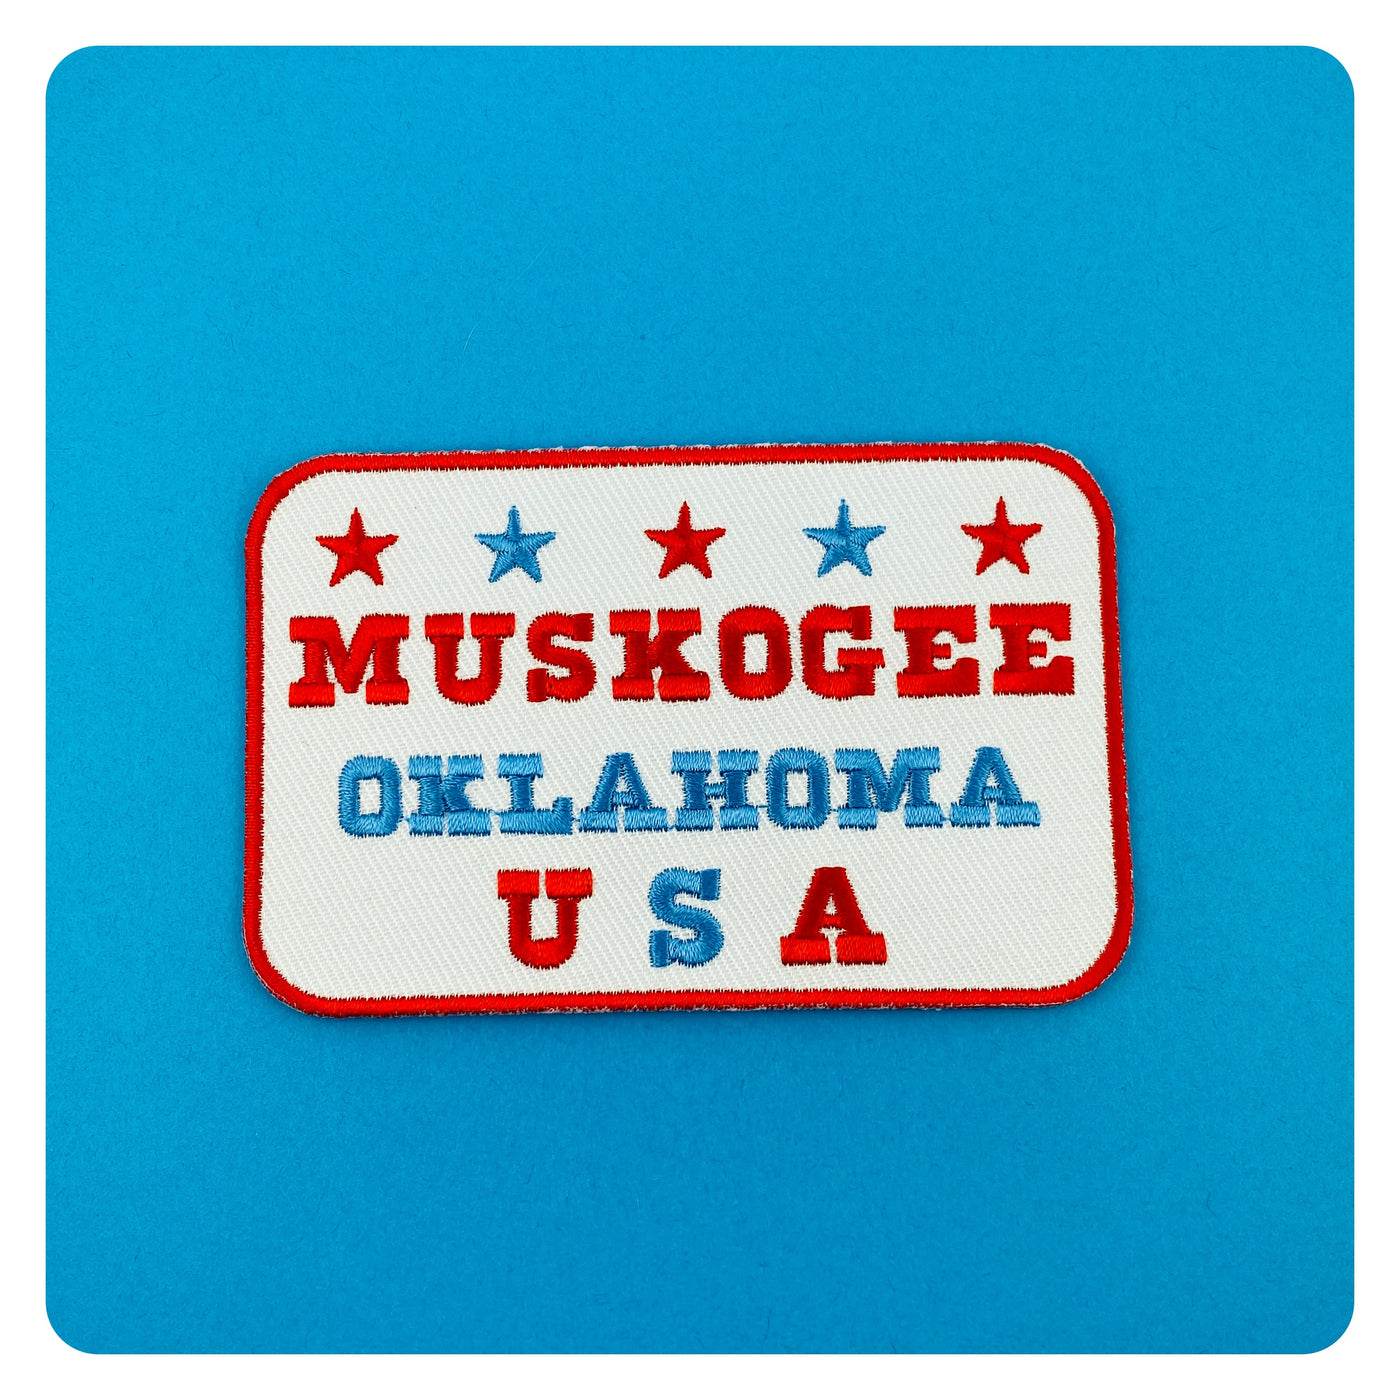 Okie from Muskogee Merle Haggard tribute patch